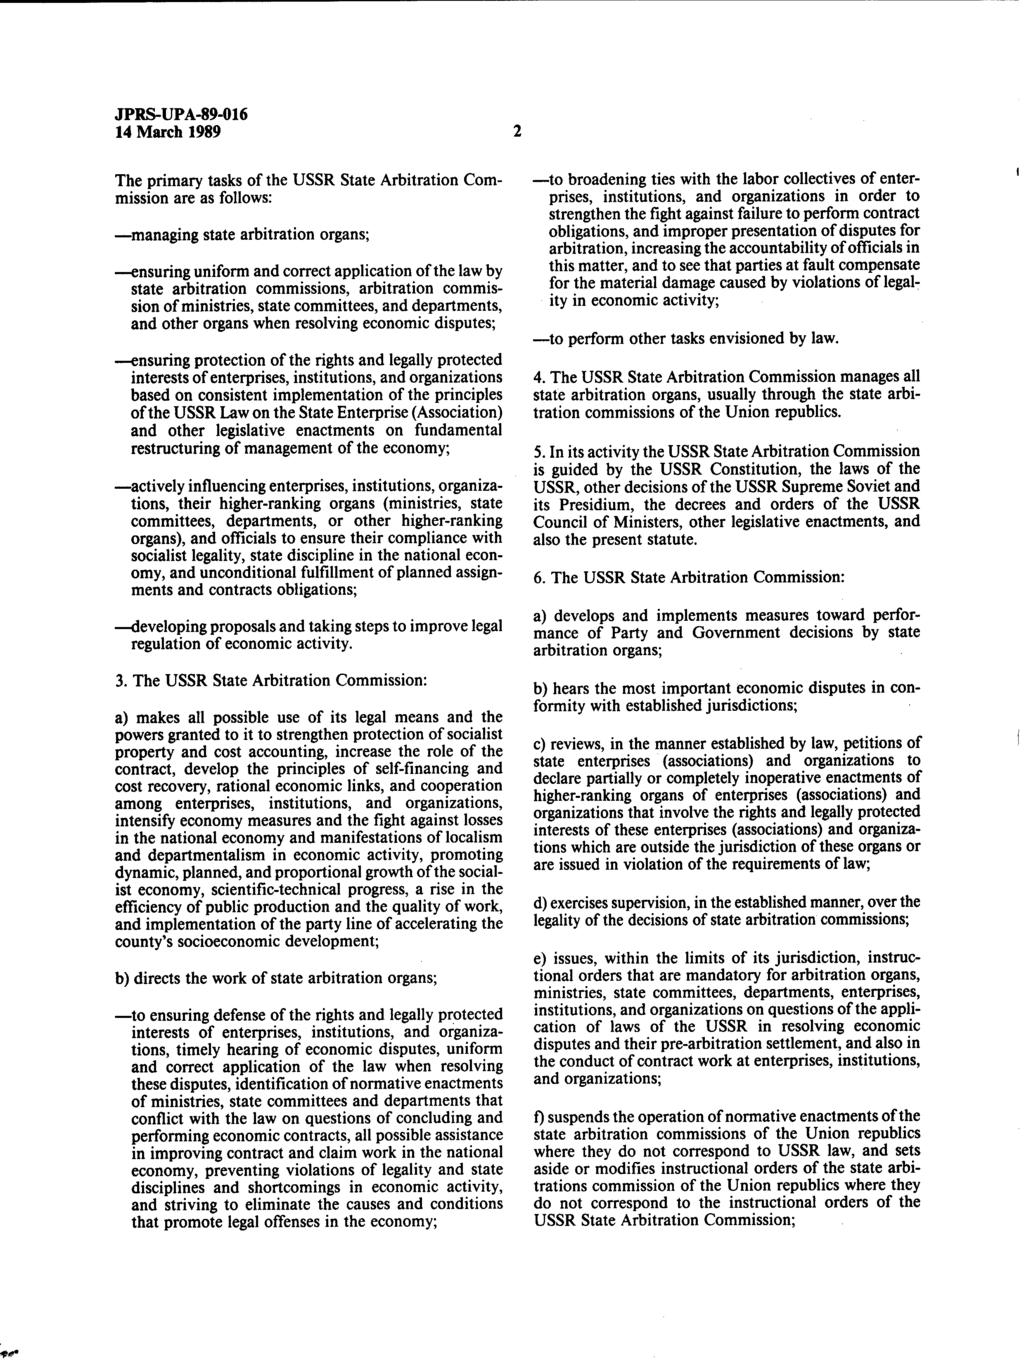 ** * JPRS-UPA-89-016 14 March 1989 The primary tasks of the USSR State Arbitration Commission are as follows: managing state arbitration organs; ensuring uniform and correct application of the law by